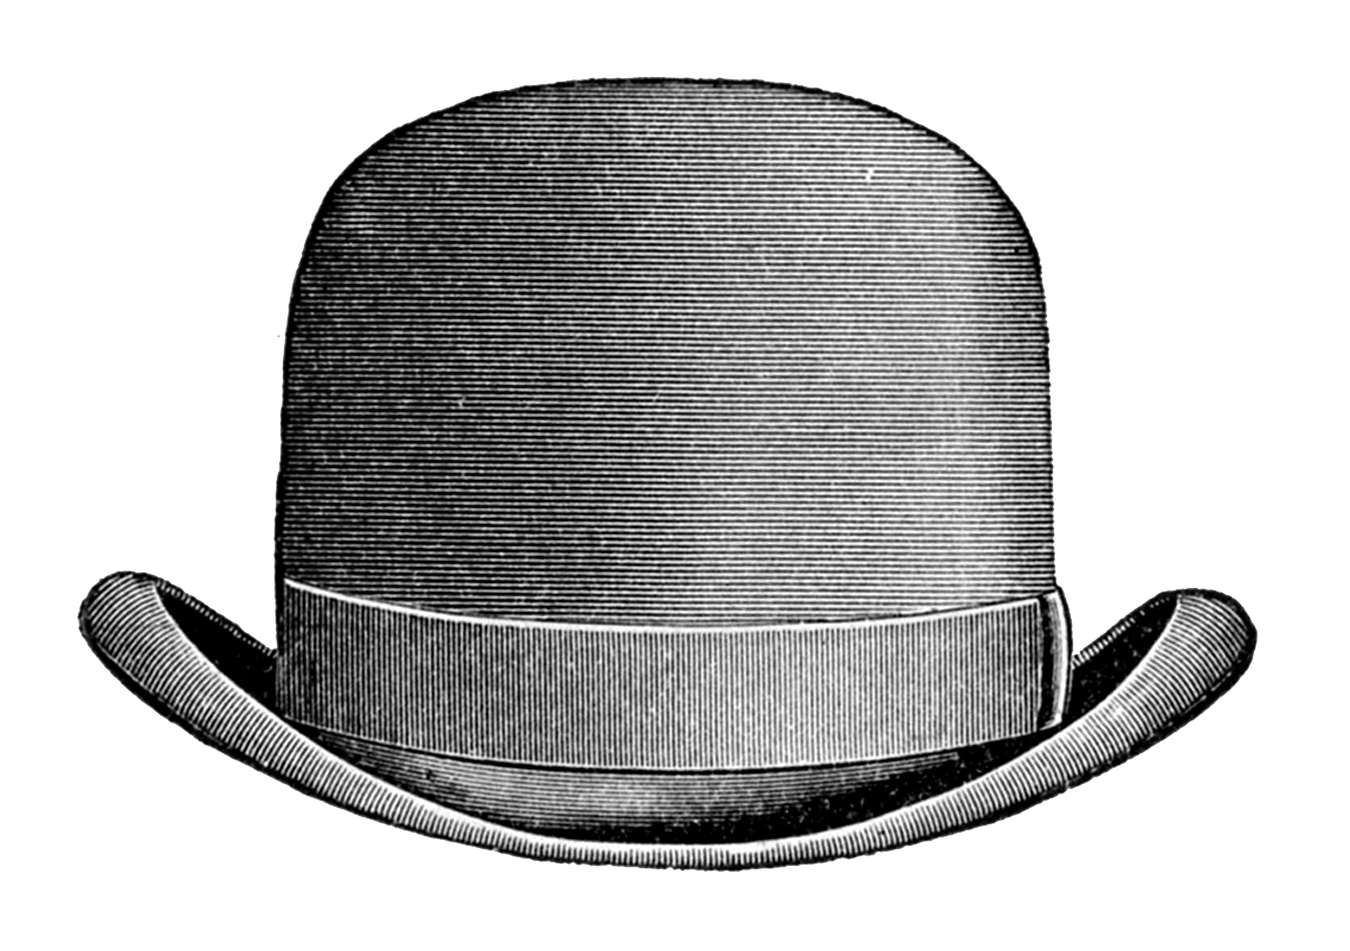 man with hat clipart - photo #18